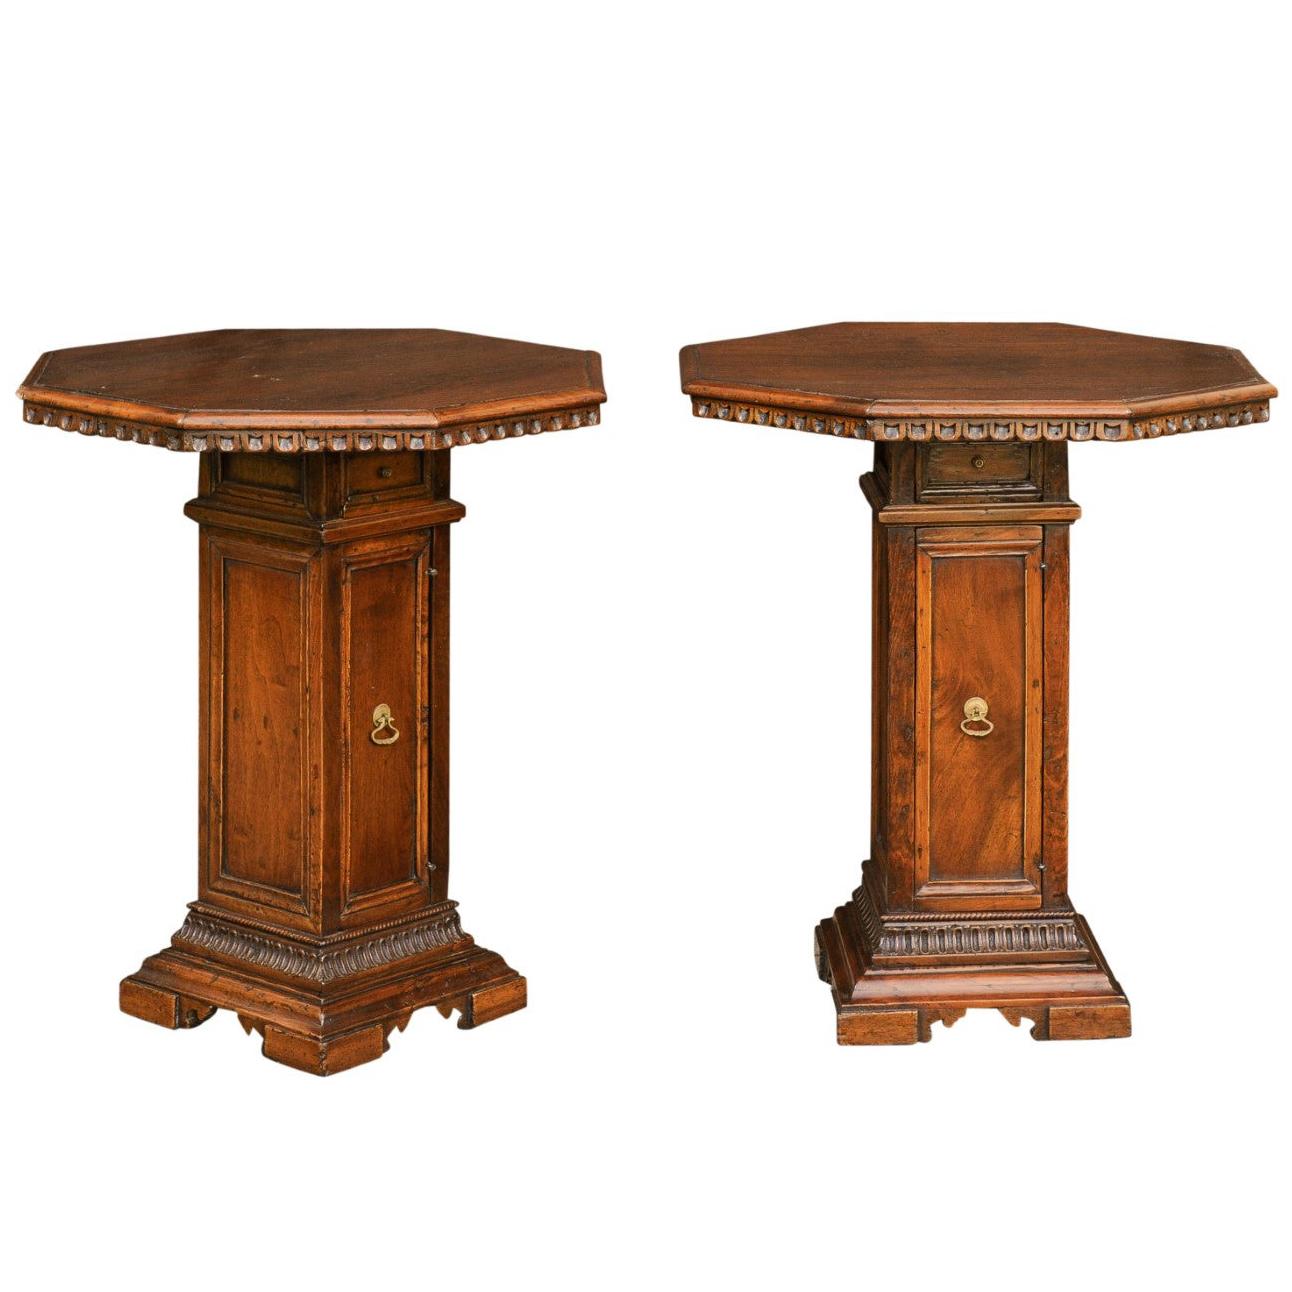 Pair of Italian 1850s Walnut Octagonal Pedestal Carved Tables with Single Door